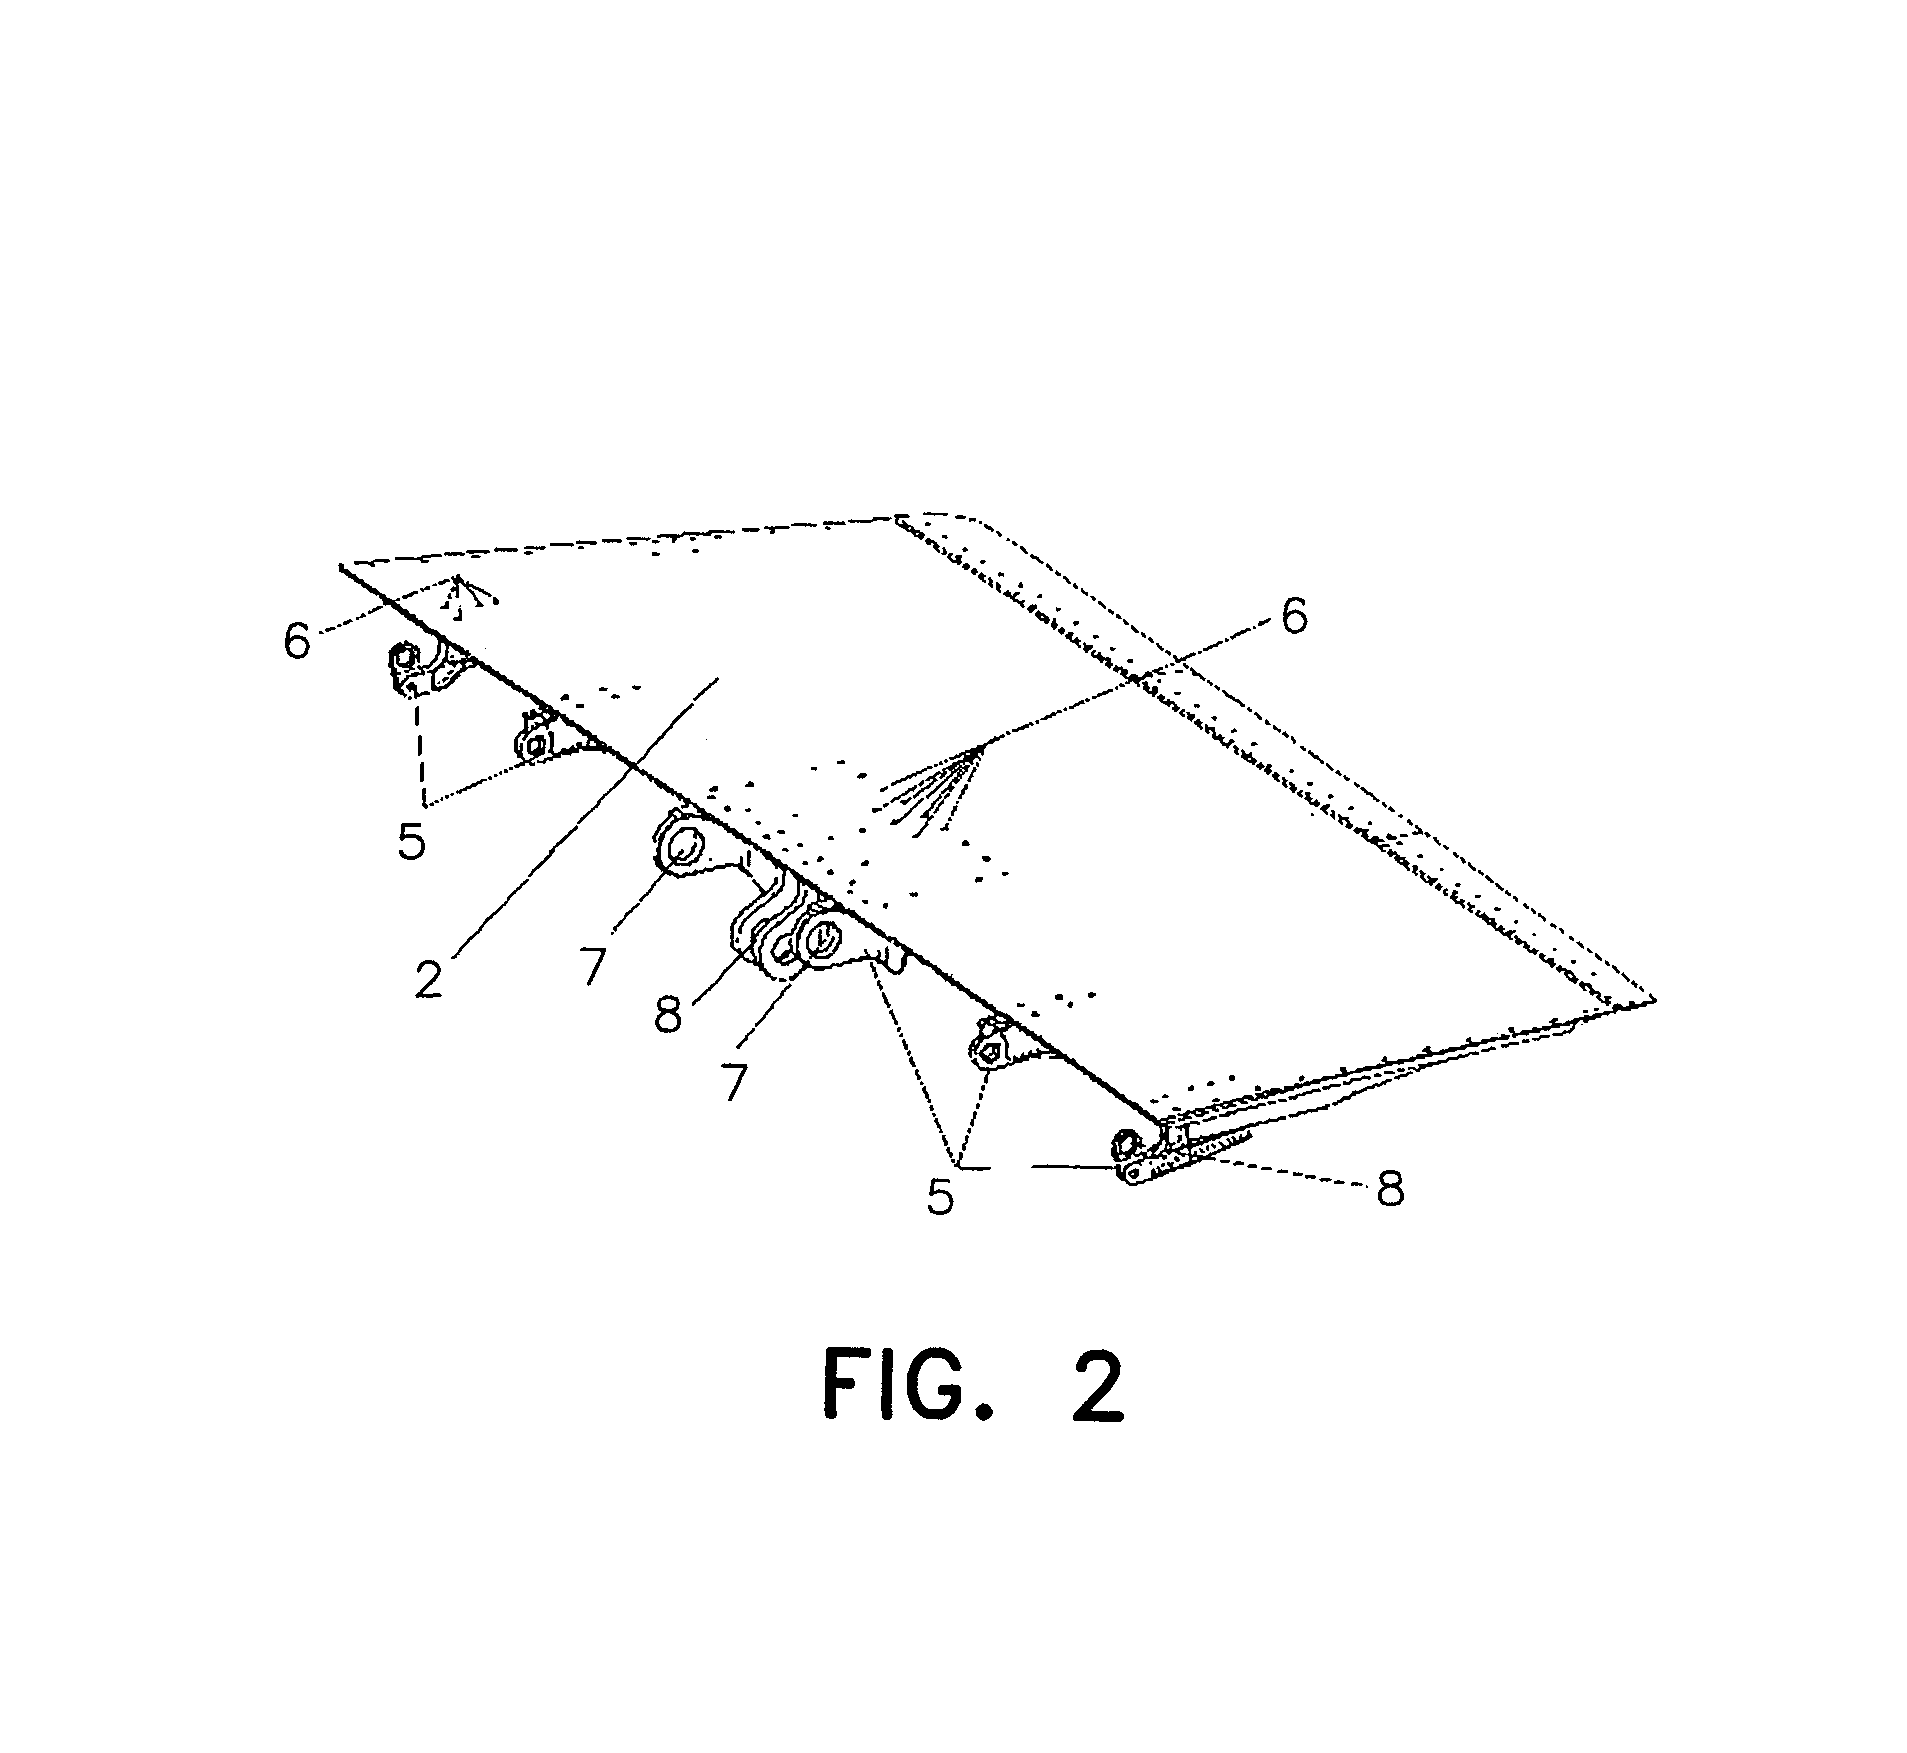 Device for connecting movable parts with structural elements of airplanes or the like